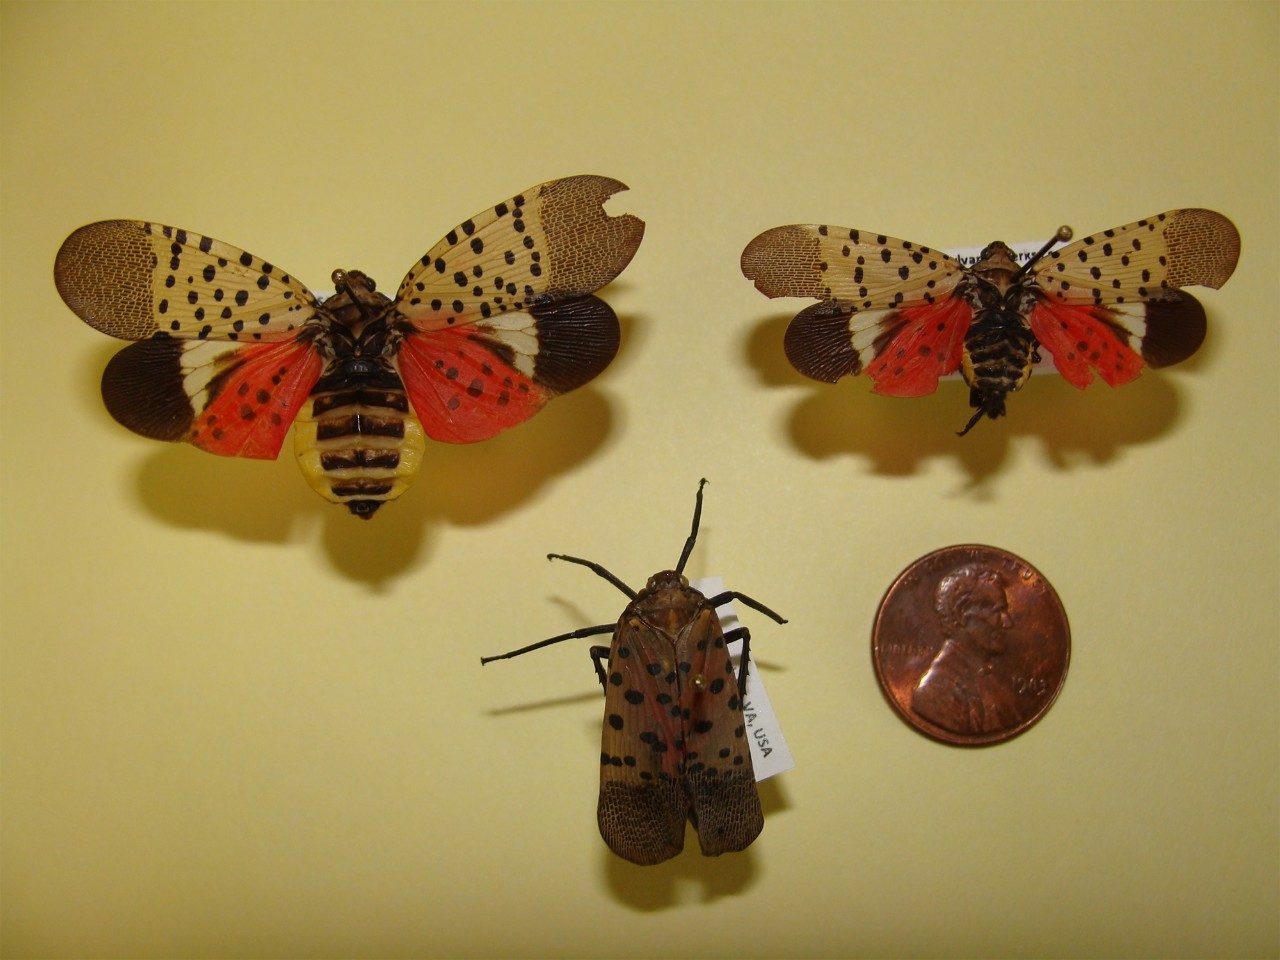 At rest, the adult SLF resembles a colorful moth and shows light-brown, grayish wings with black spots held "tent-like" over its body. When the wings are open, yellow and red patches are exposed. Adult SLF are approximately 1" long and ½" wide.